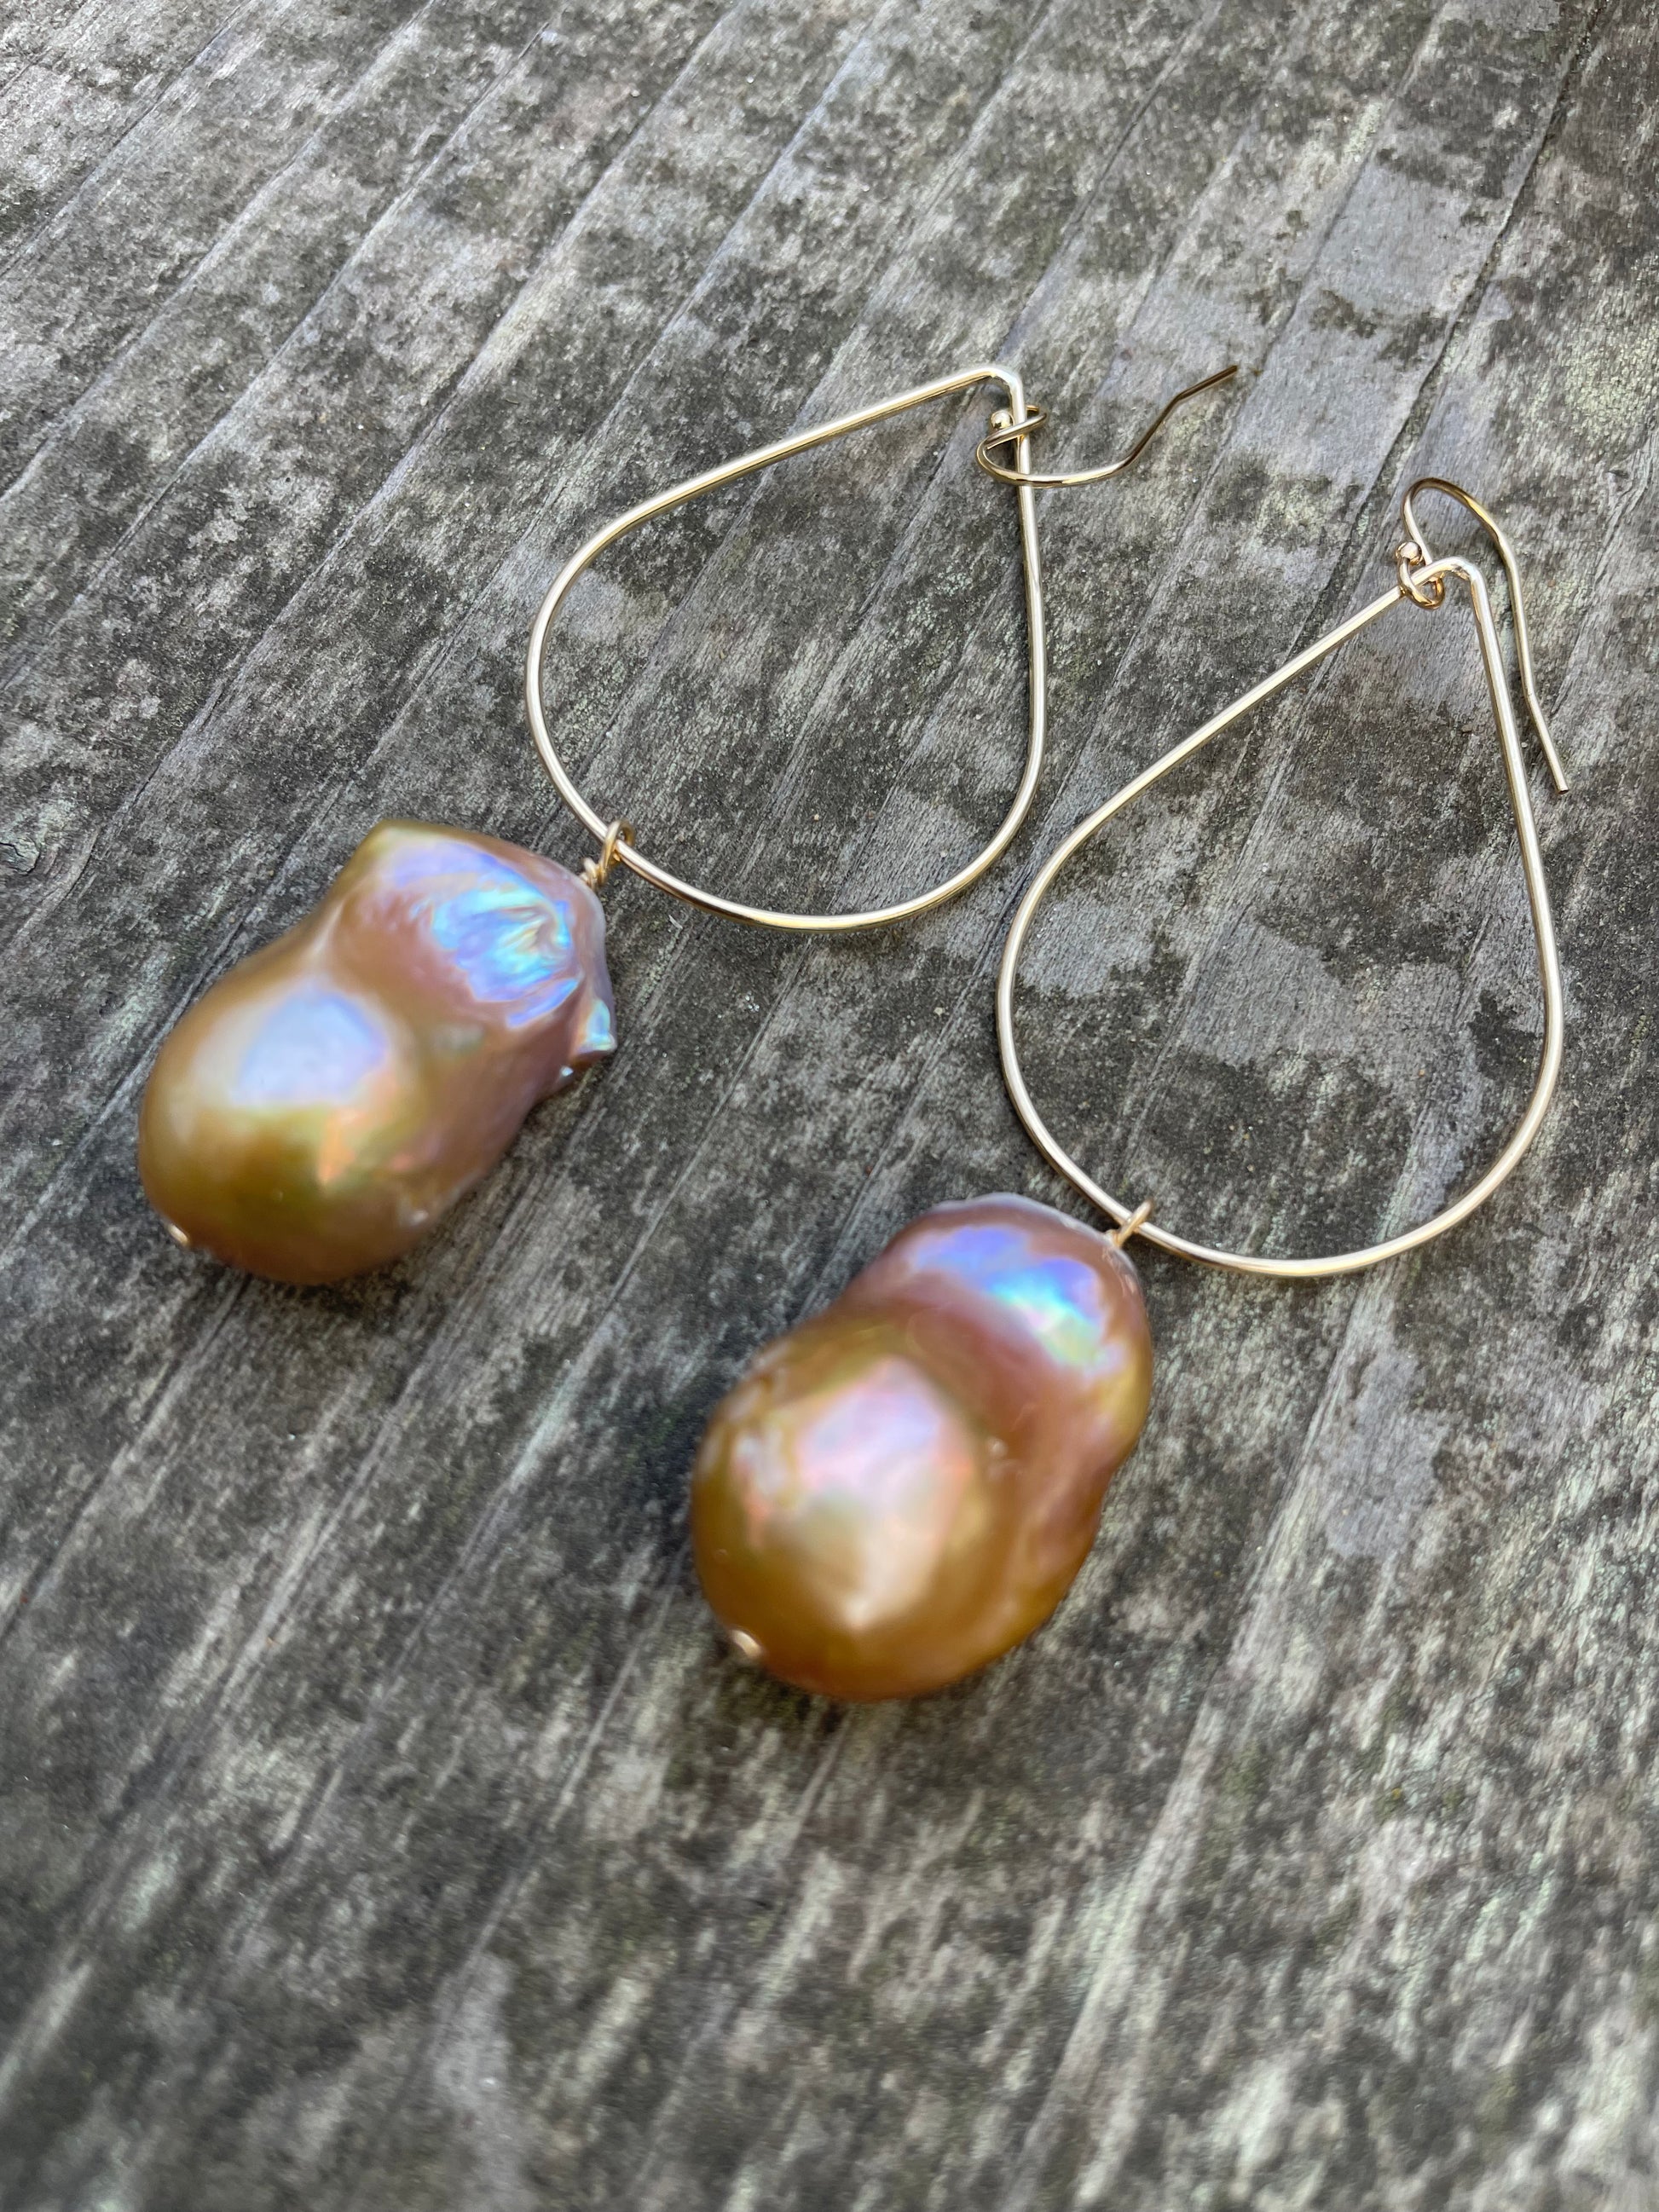 Large bronze baroque fireball pearls hanging off of a teardrop shaped gold wire with ear wires on a wooden background.